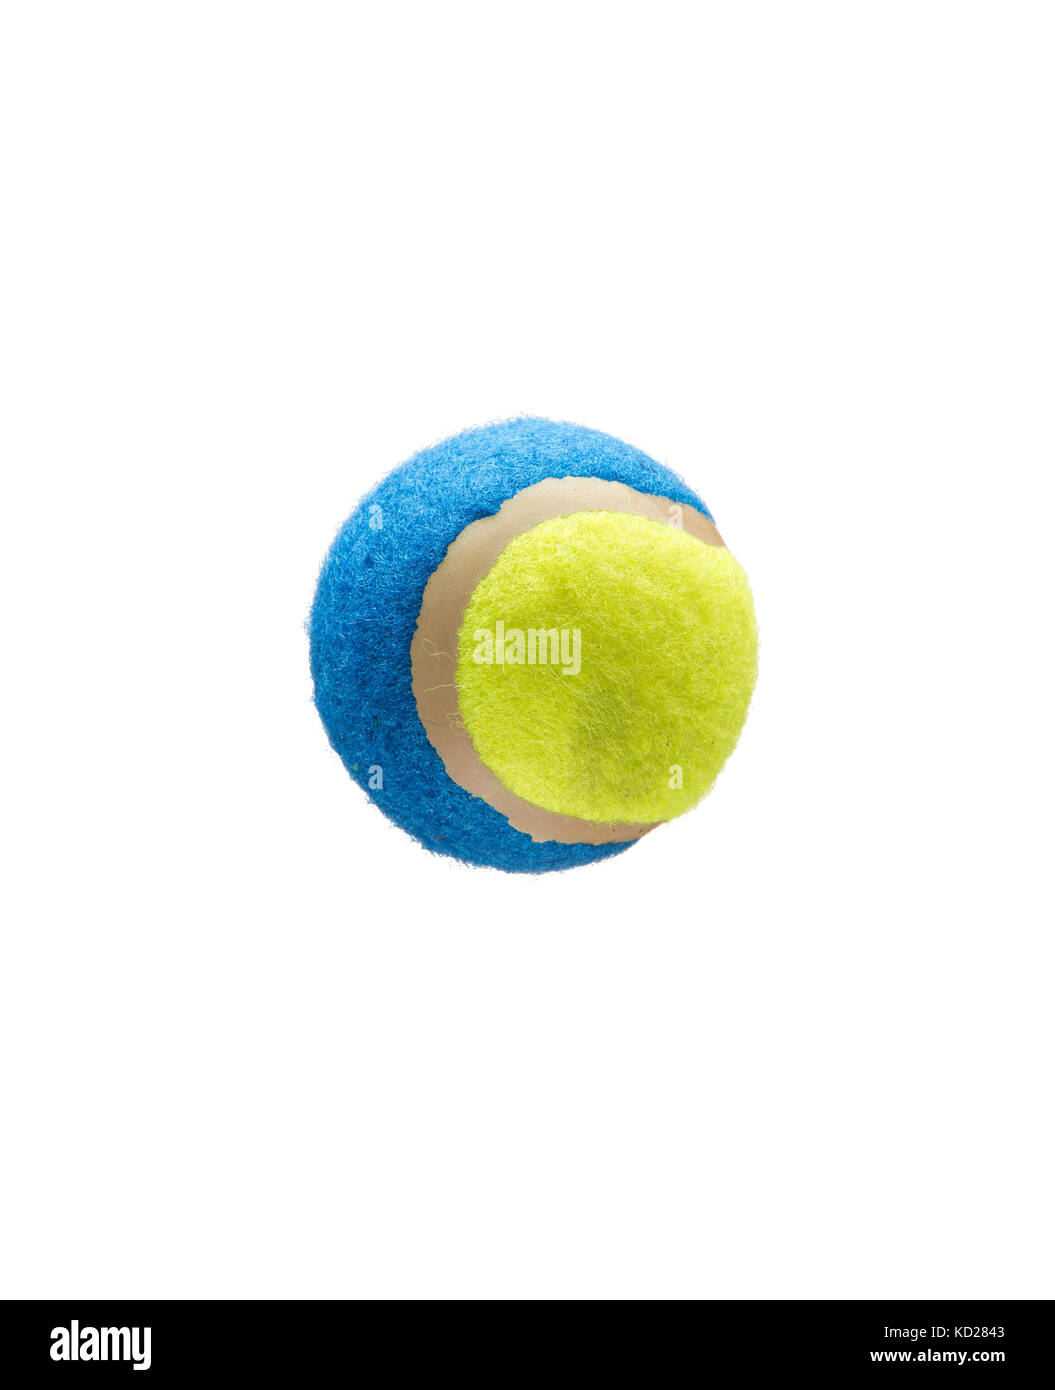 blue and yellow tennis ball isolated on white background Stock Photo